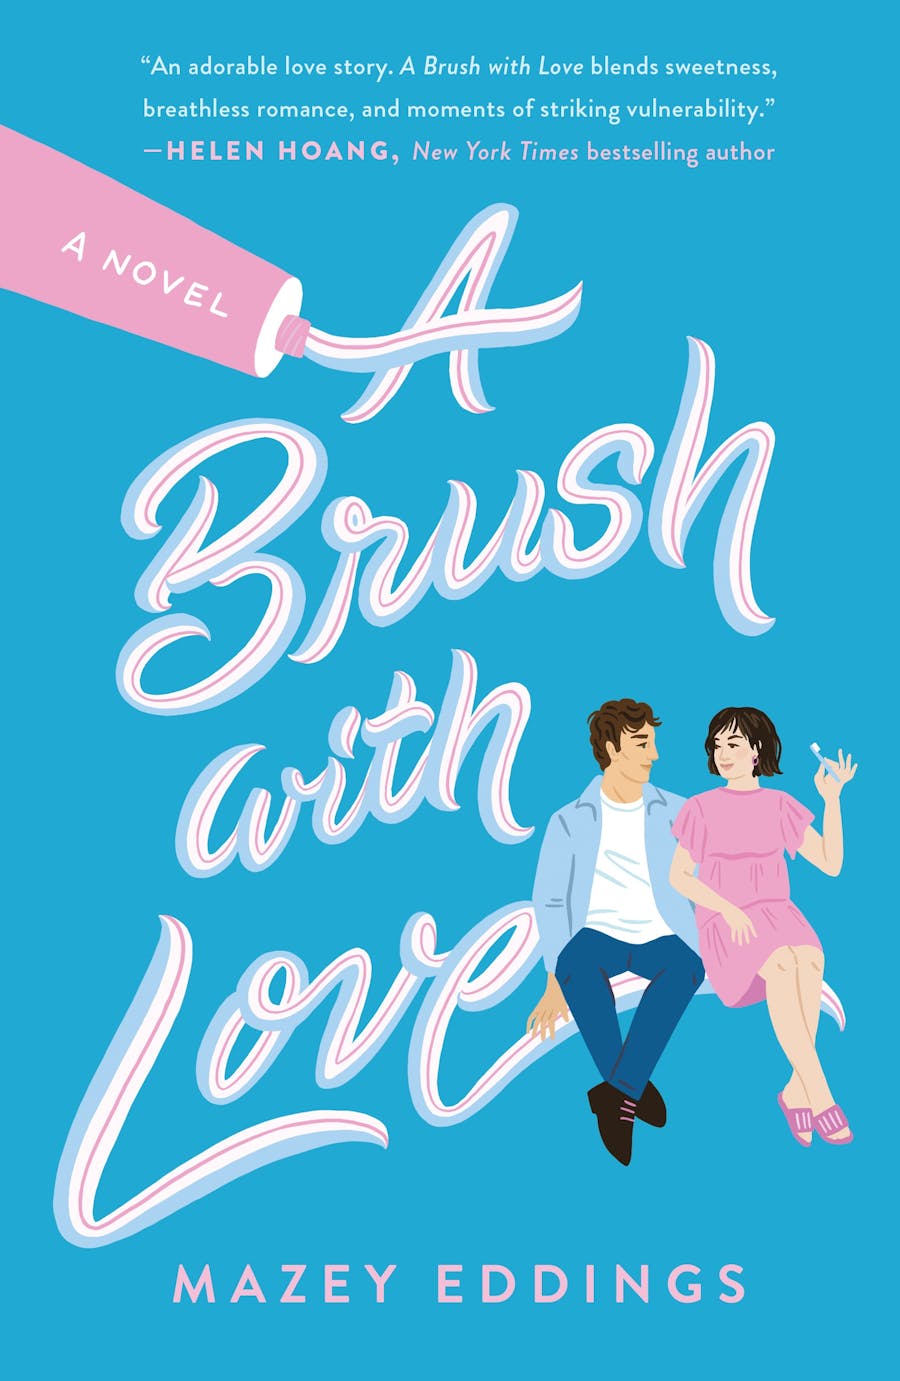 A Brush with Love (A Brush with Love #1)